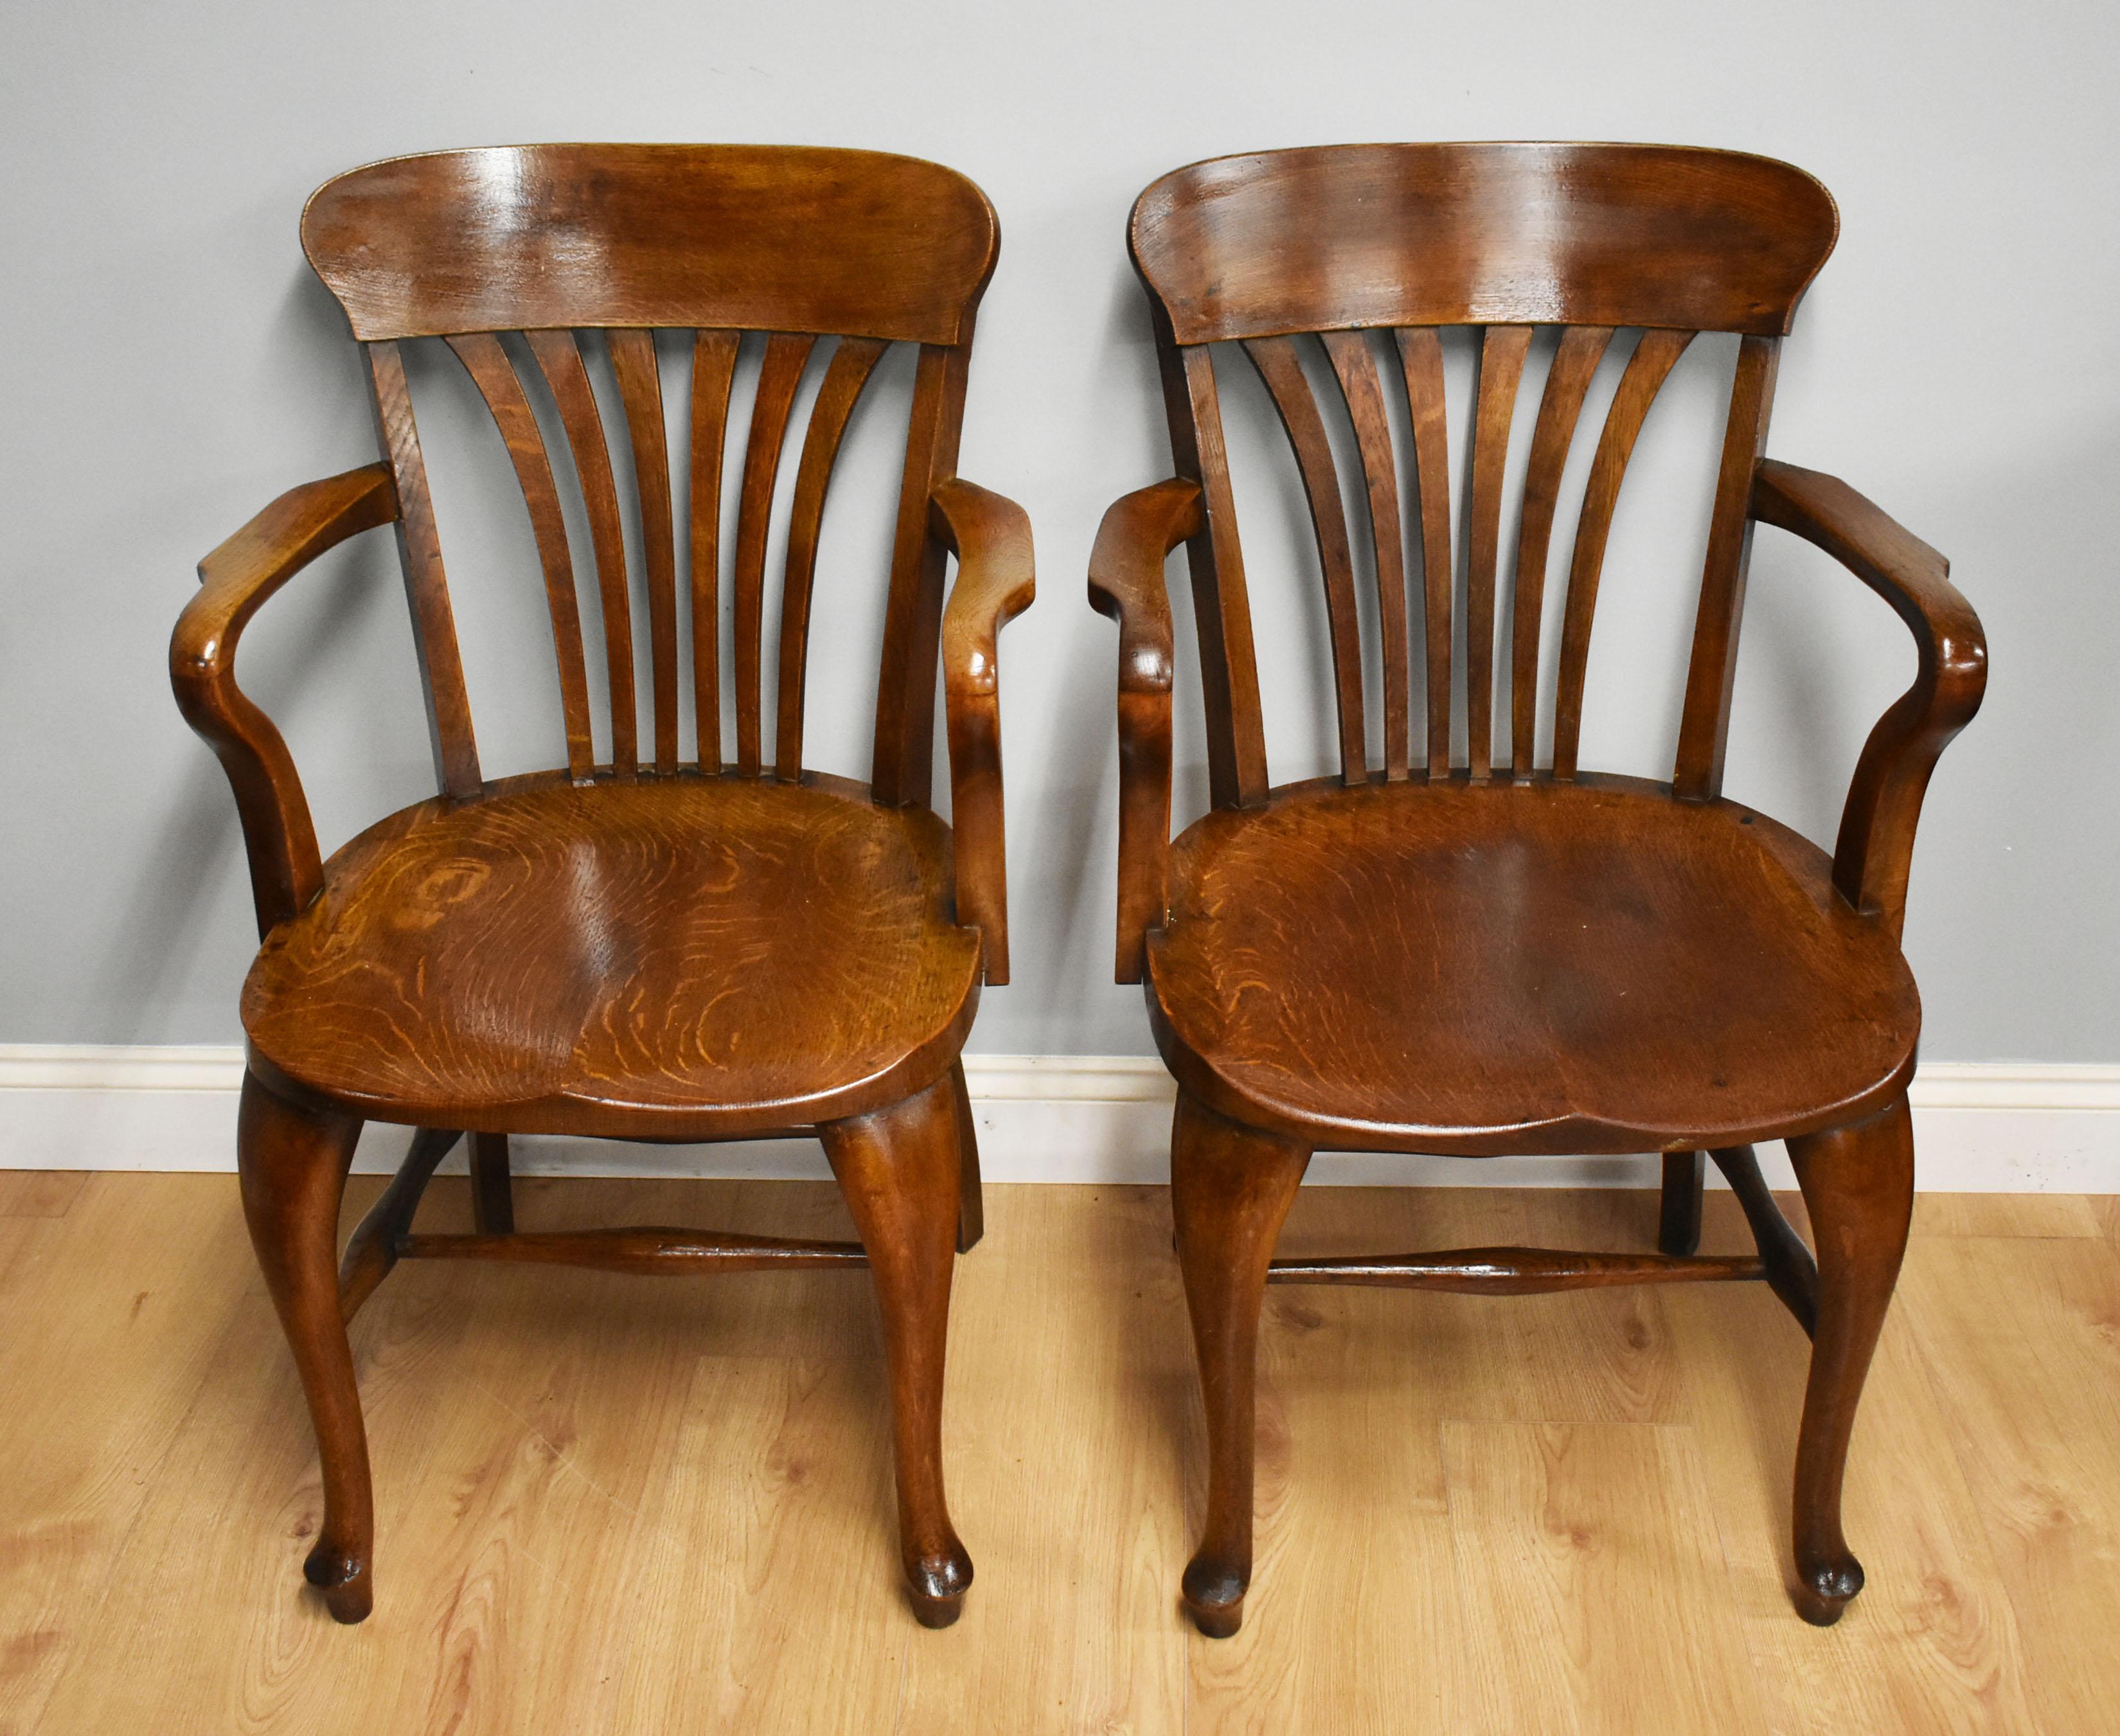 For sale is a good quality pair of solid oak Edwardian desk chairs by T. Oliver, Torquay. Both of the chairs are in very good original condition, being structurally sound and showing no signs of old repairs. 

Dimensions
Width: 22